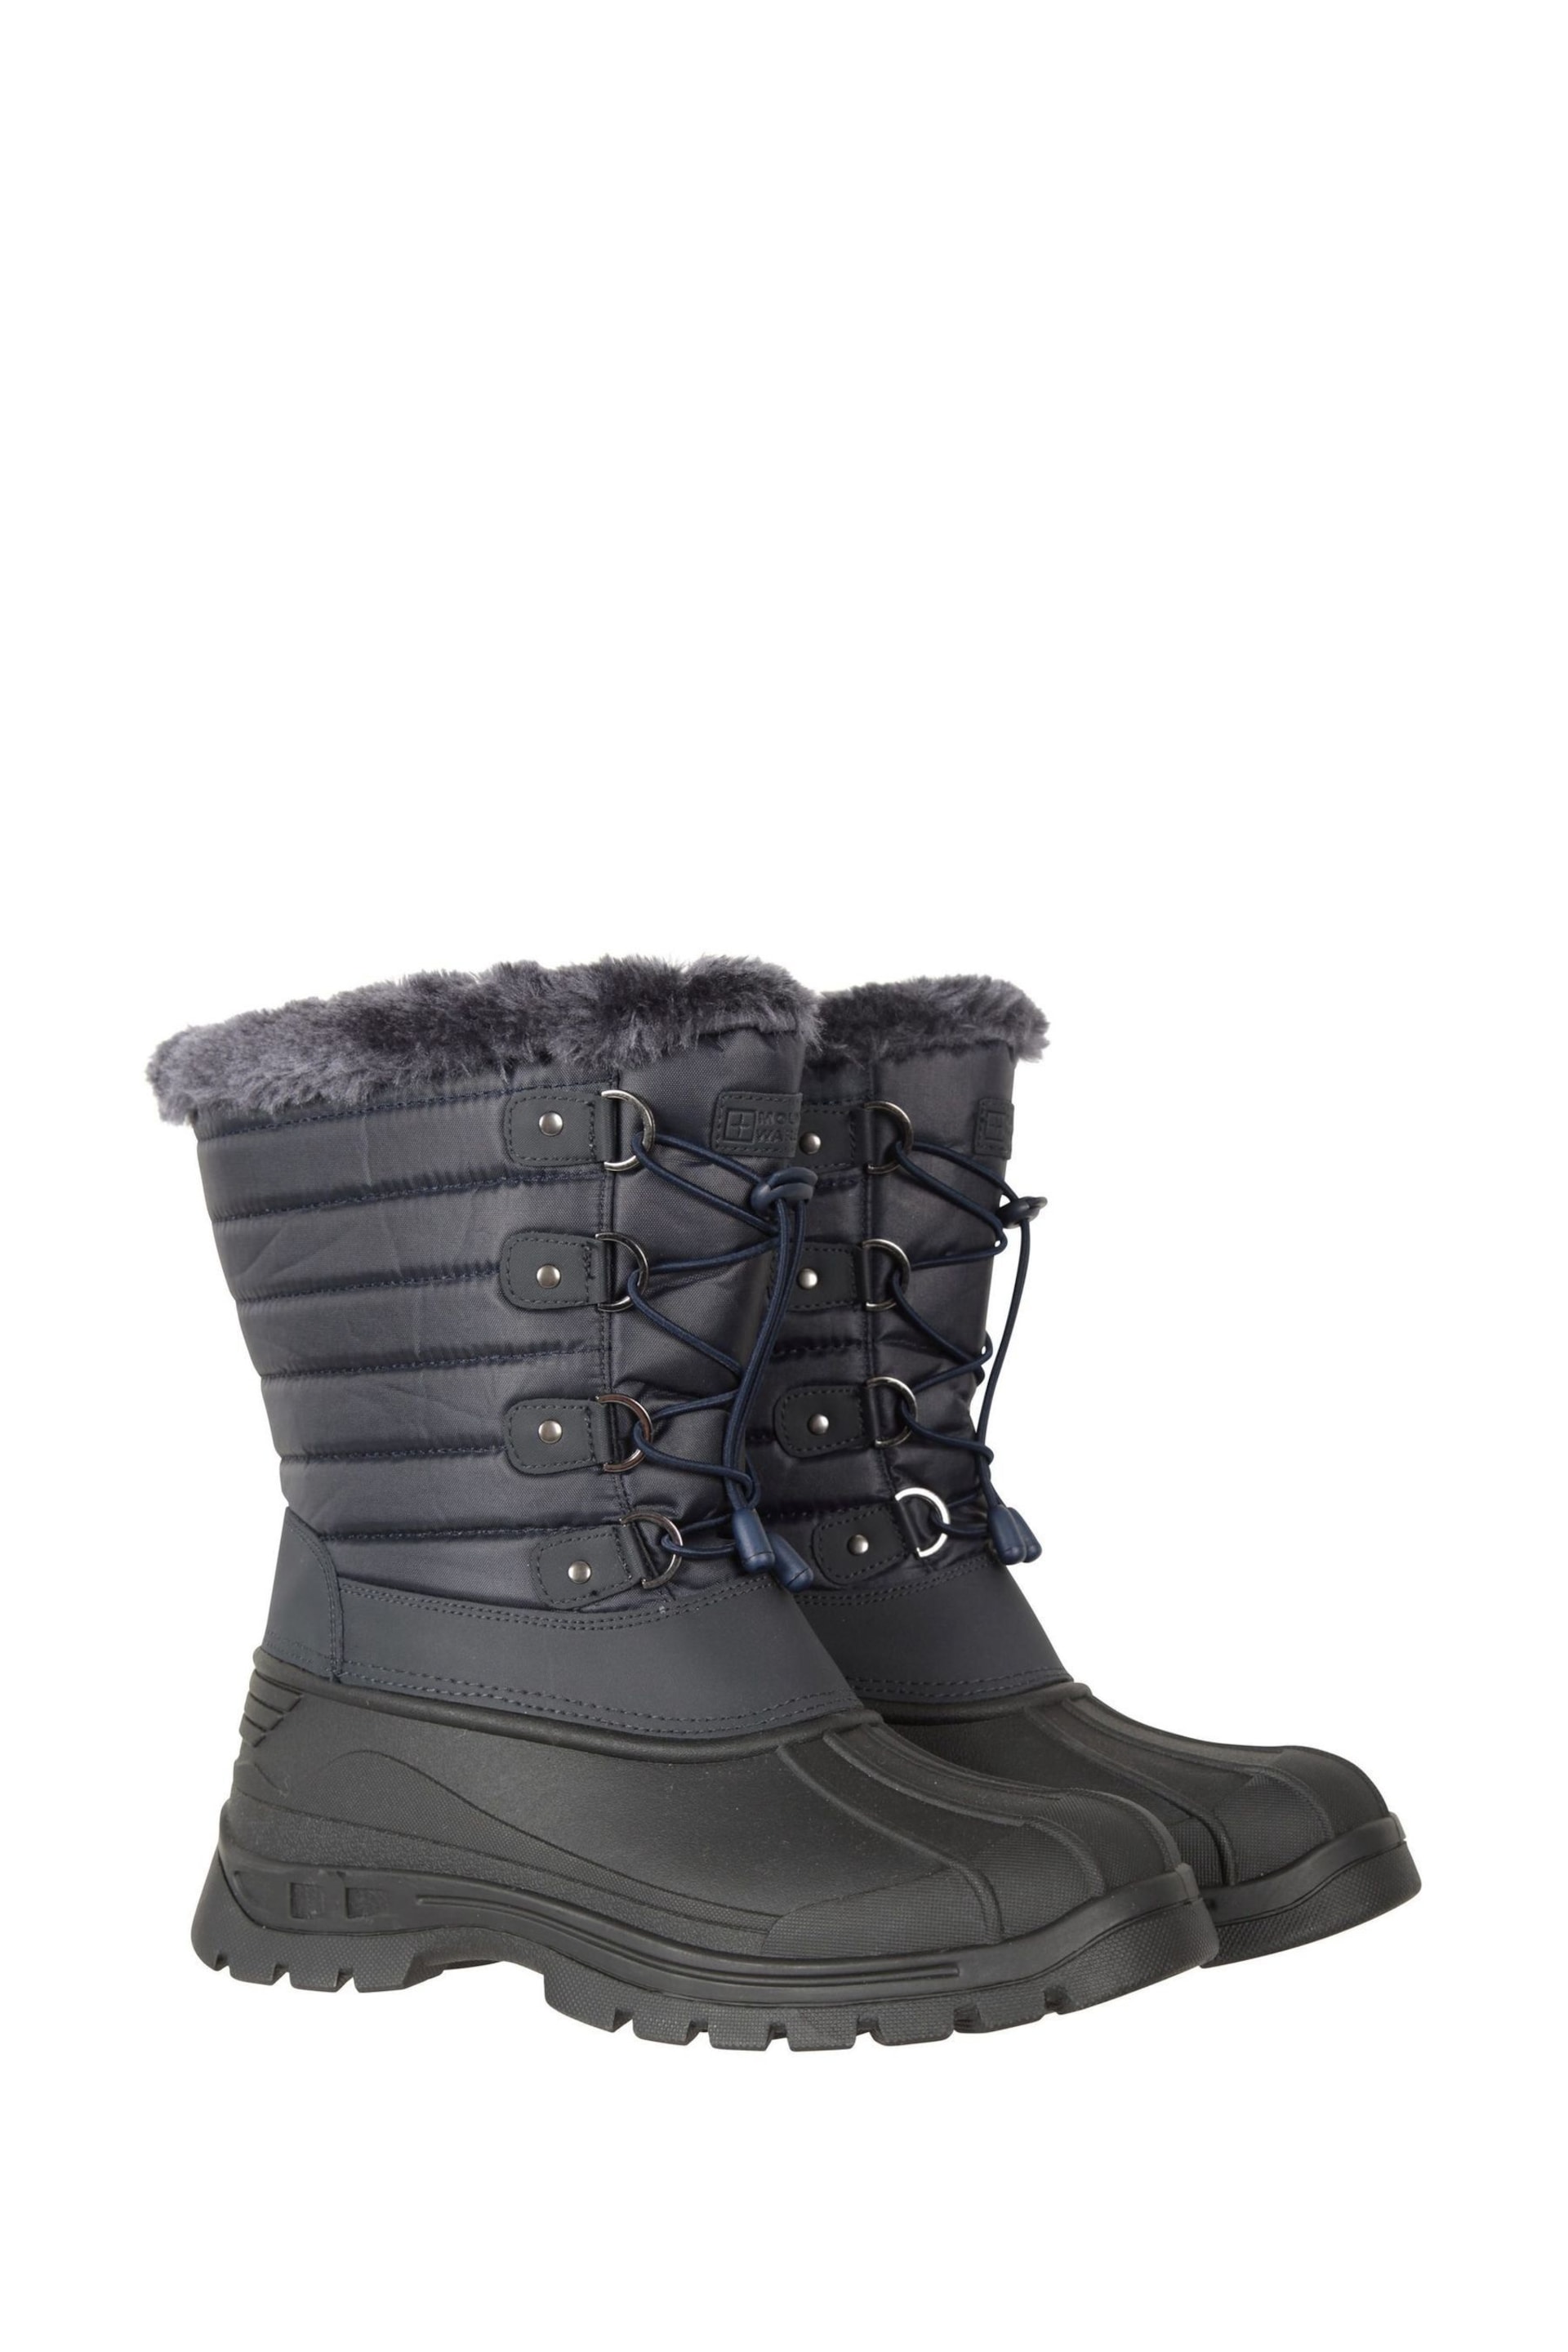 Mountain Warehouse Blue Womens Whistler Sherpa Lined Snow Boots - Image 3 of 5